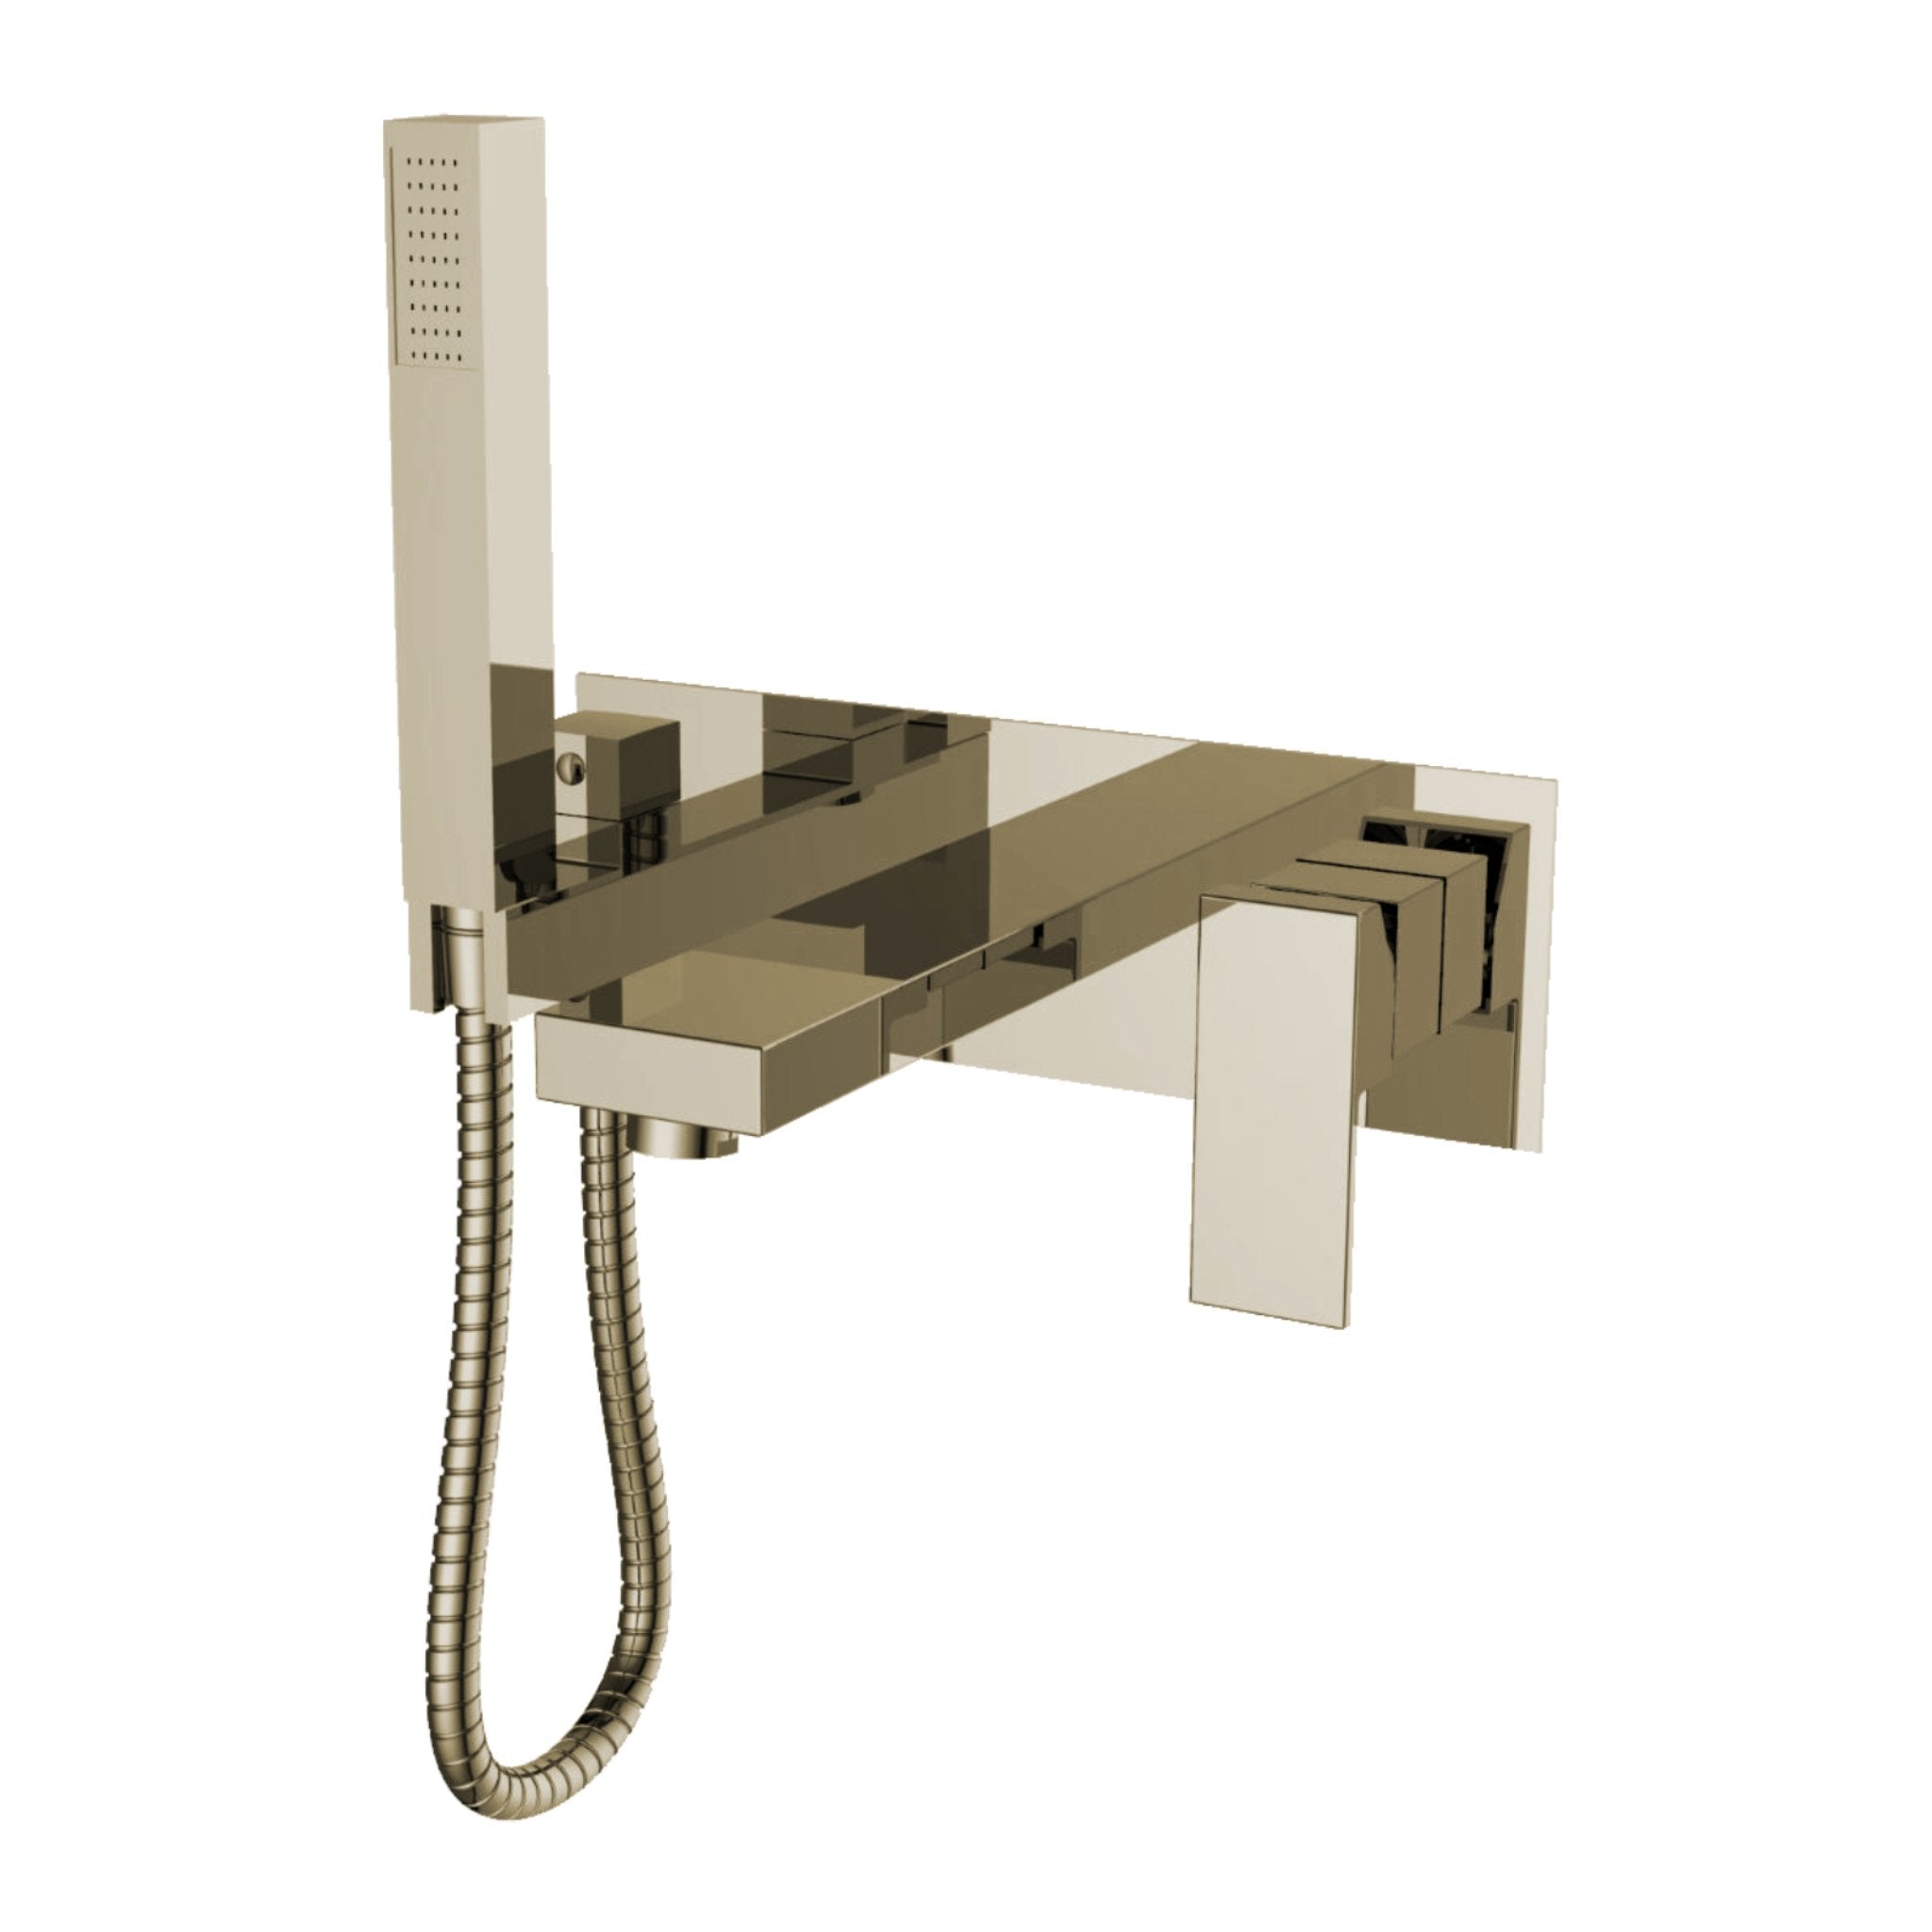 Sally Square Wall Mounted Tub Faucet - Bhdepot 